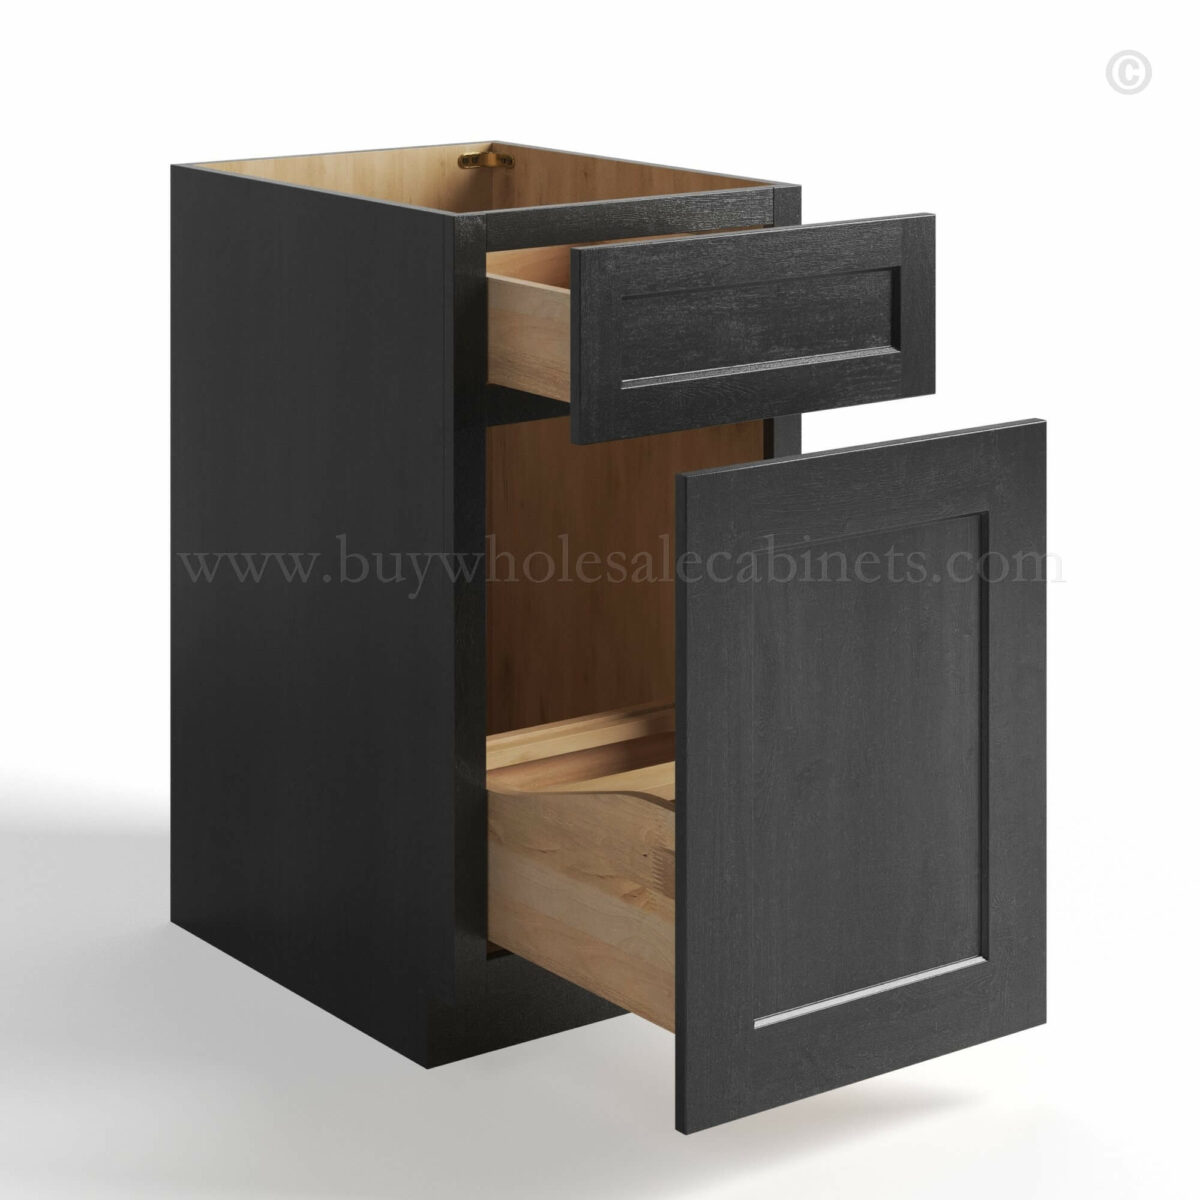 charcoal black shaker base trash cabinet with single door and drawer open, rta cabinets, wholesale cabinets